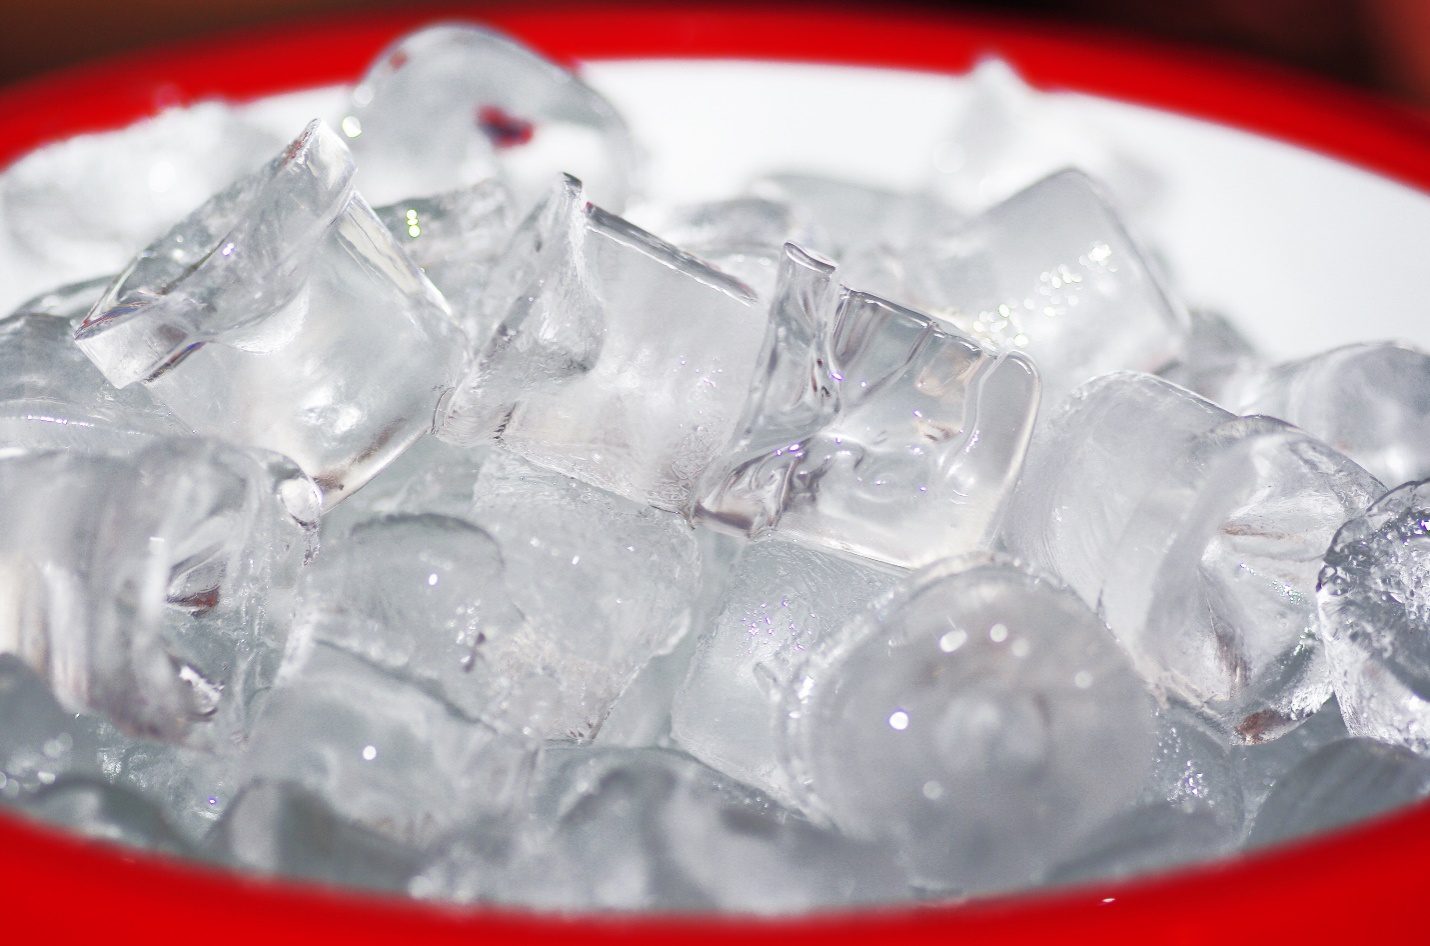 an image of ice cubes from an ice machine placed in a bowl